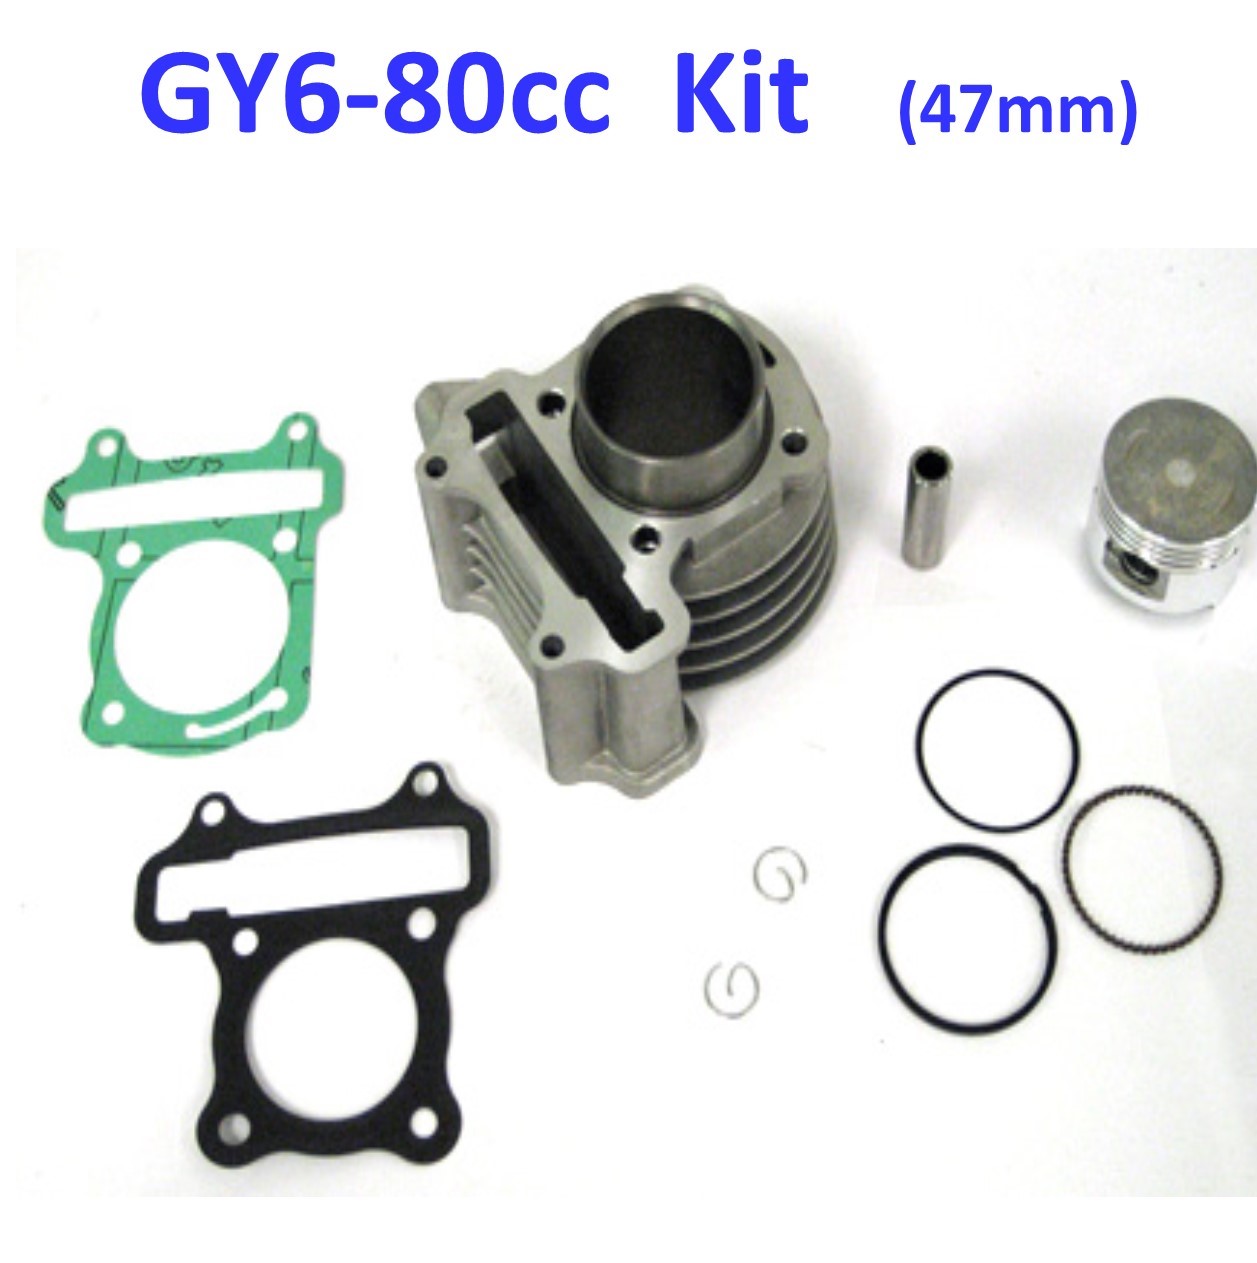 80cc (High Performance) Cylinder Piston Top End Kit For GY6-50 QMB139 Chinese Scooter Motors. Bore=47mm Requires Head #634585